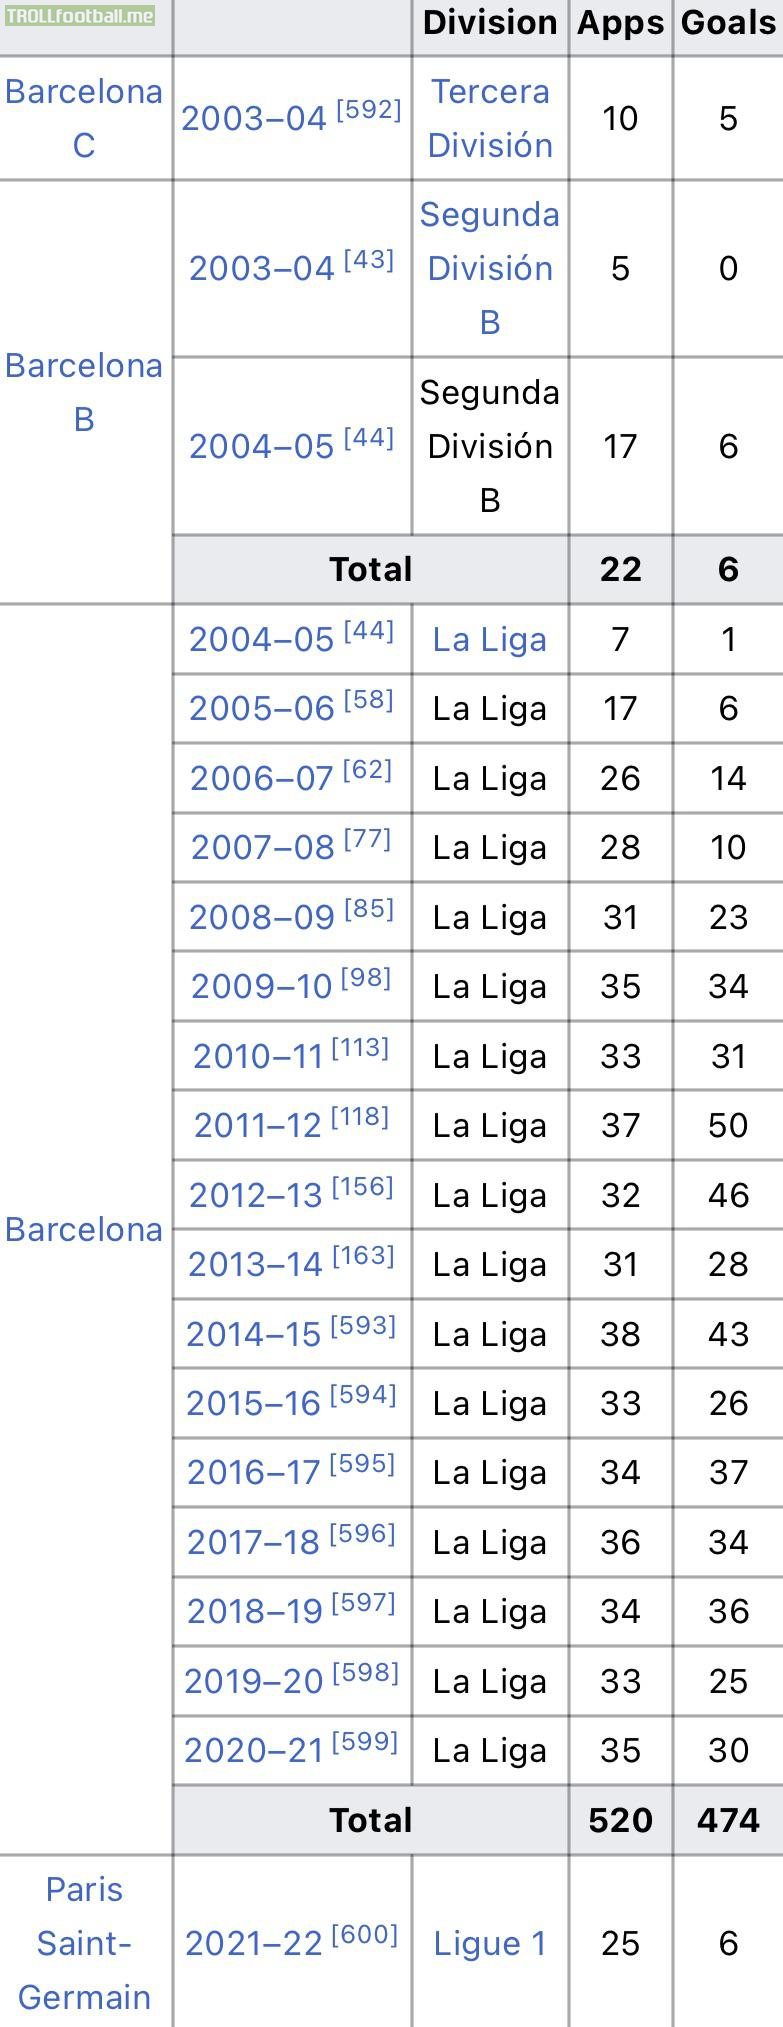 Lionel Messi finishes this season with 6 league goals, his worst since the 2005-06 La Liga season.